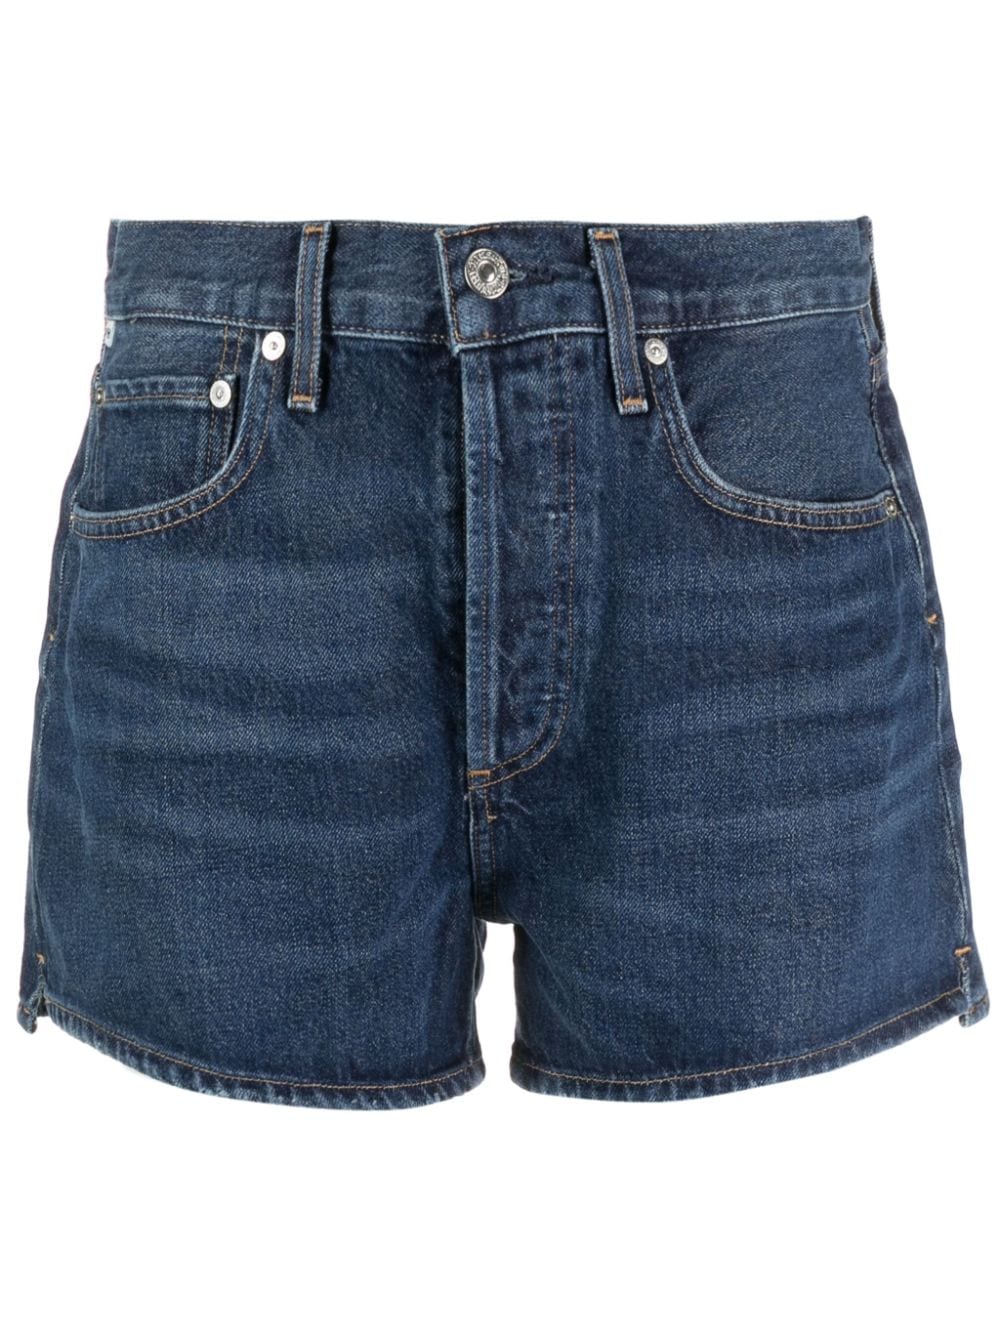 Citizens of Humanity Marlow Jeans-Shorts - Blau